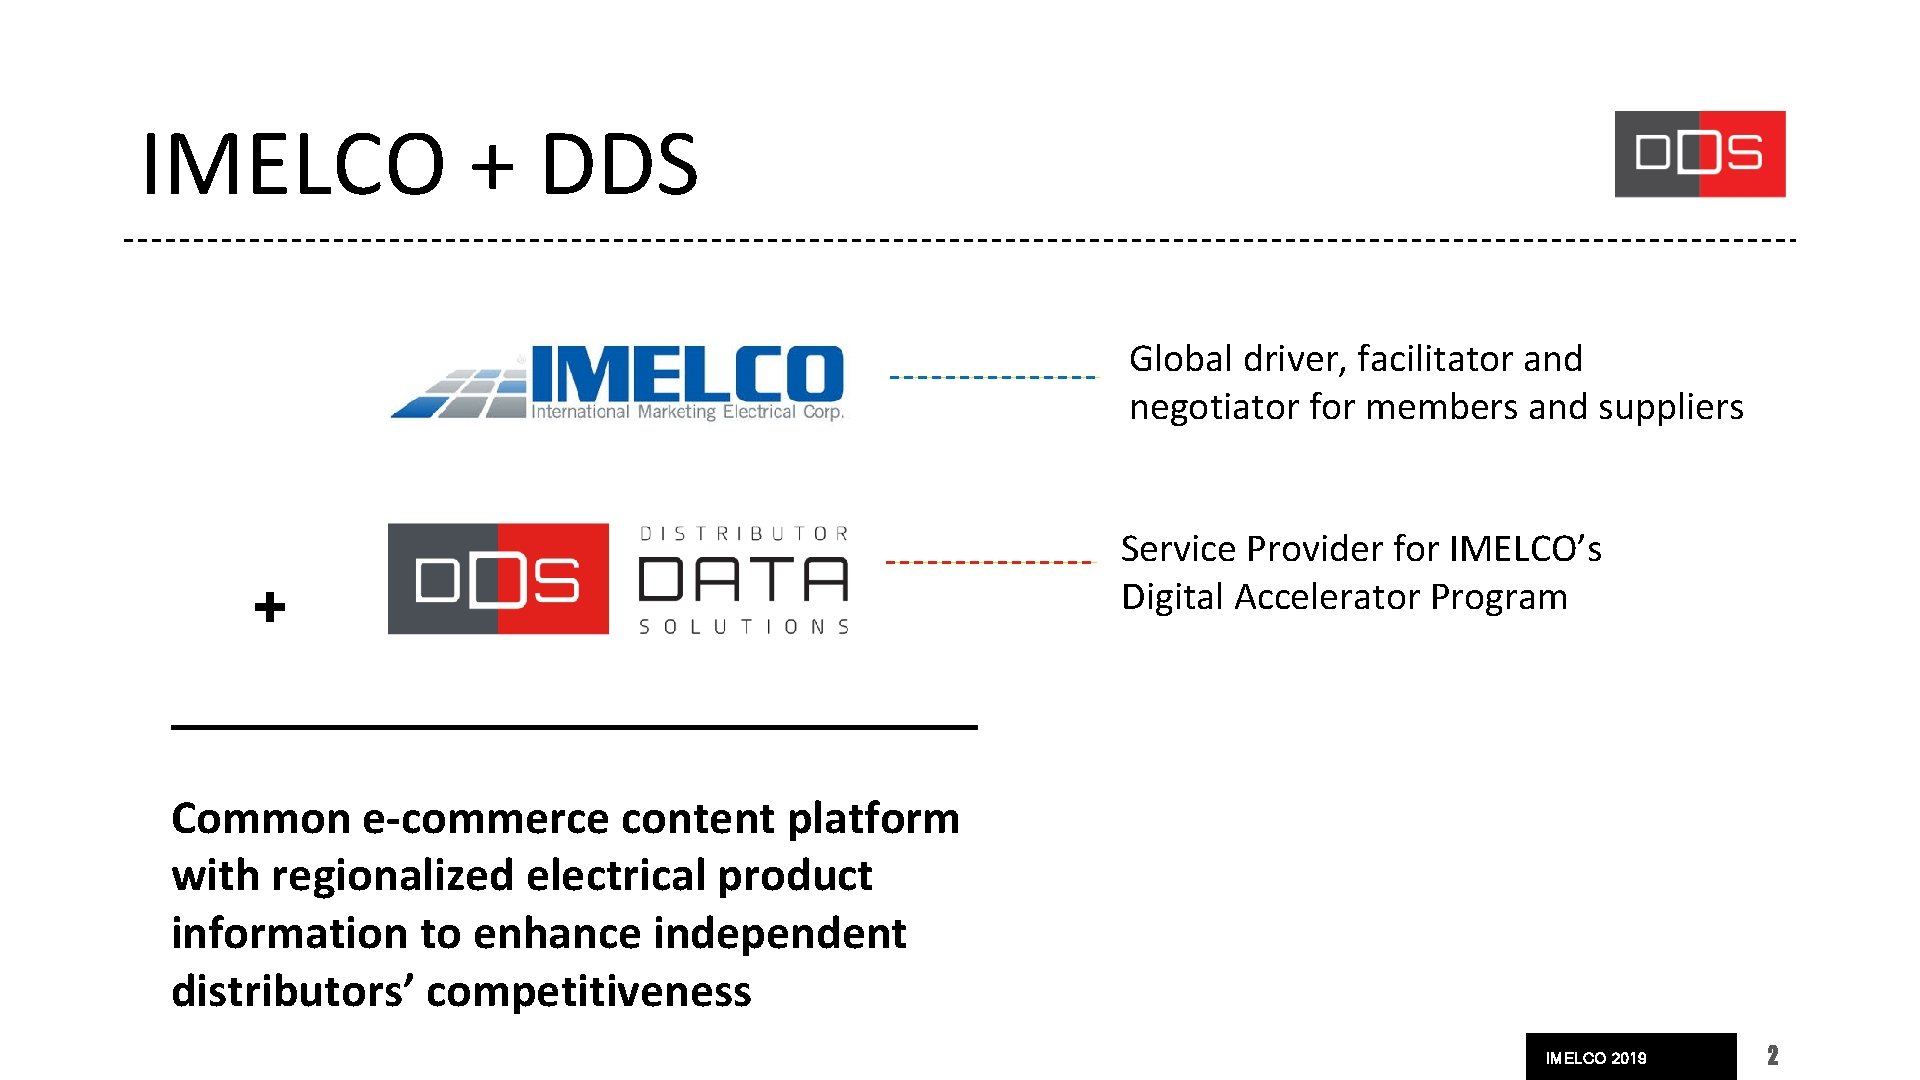 IMELCO + DDS Global driver, facilitator and negotiator for members and suppliers + Service